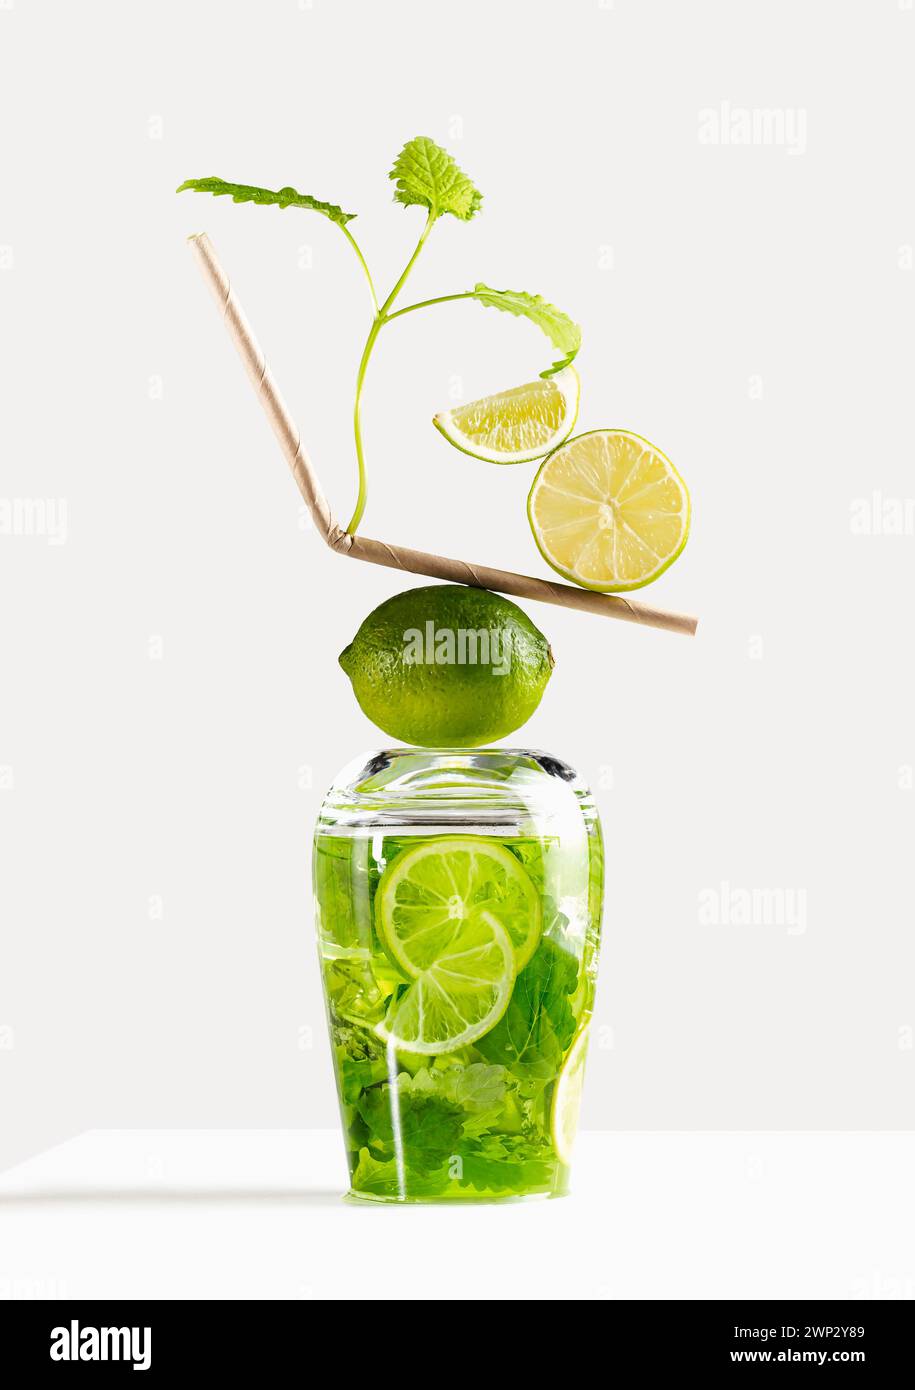 Balance - mojito cocktail in an inverted glass on a light background with a paper tube, limes and mint. One of set mojito Stock Photo